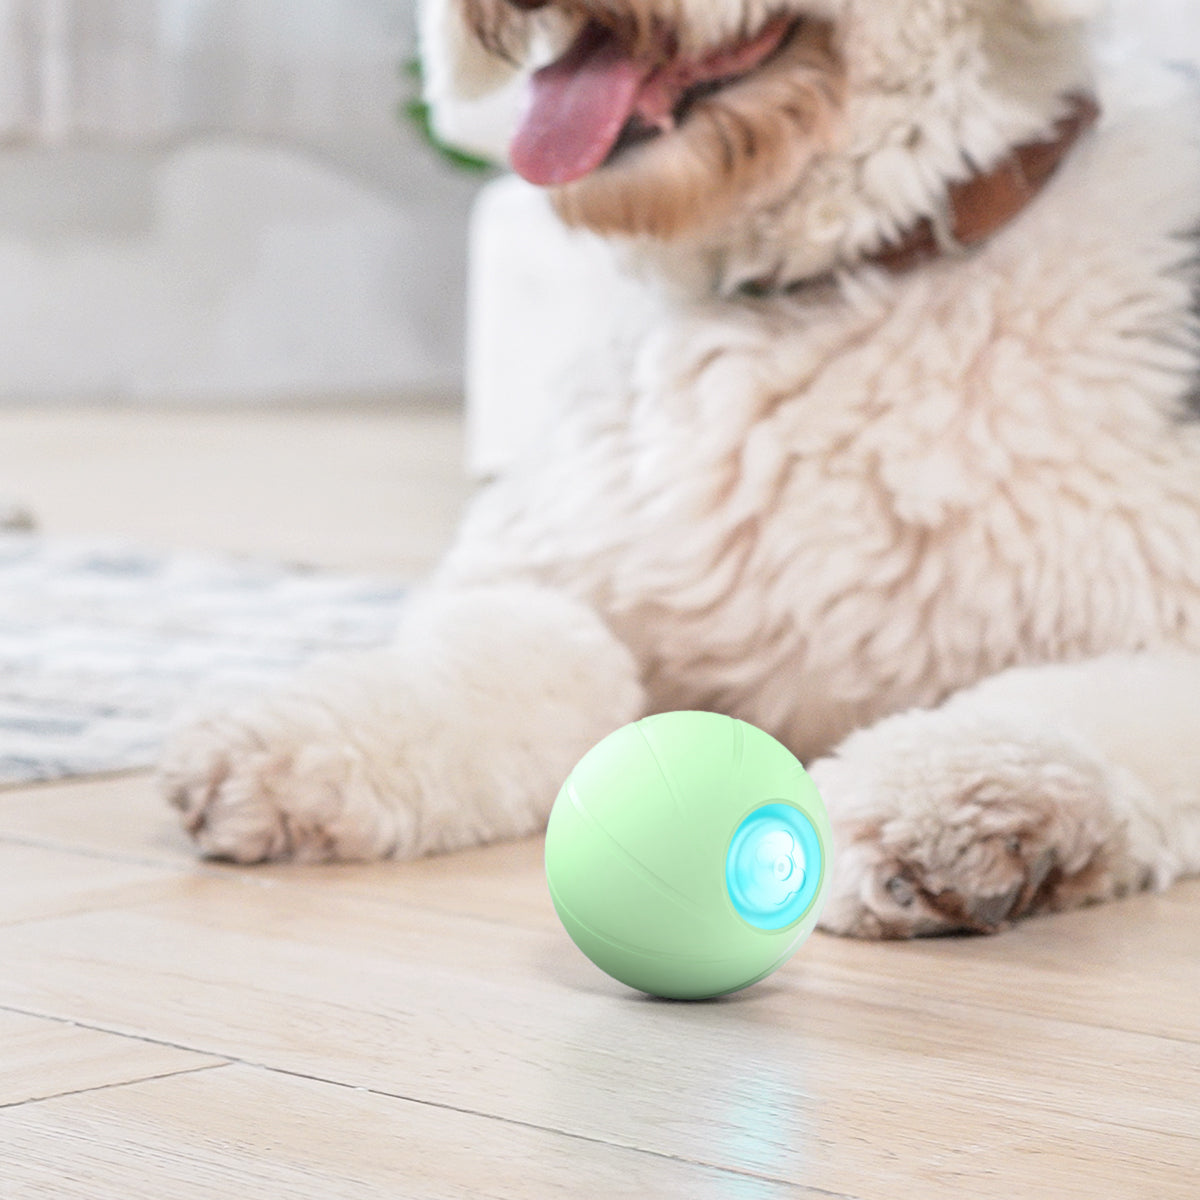 3 Interactive Modes Cheerble Intelligent Interactive Dog Toy Ball with LED  Lights, Wicked Ball SE, Made of Natural Rubber, Active Rolling Ball for  Puppy/Small/Medium Dogs and Cats, DC Rechargeable Blue